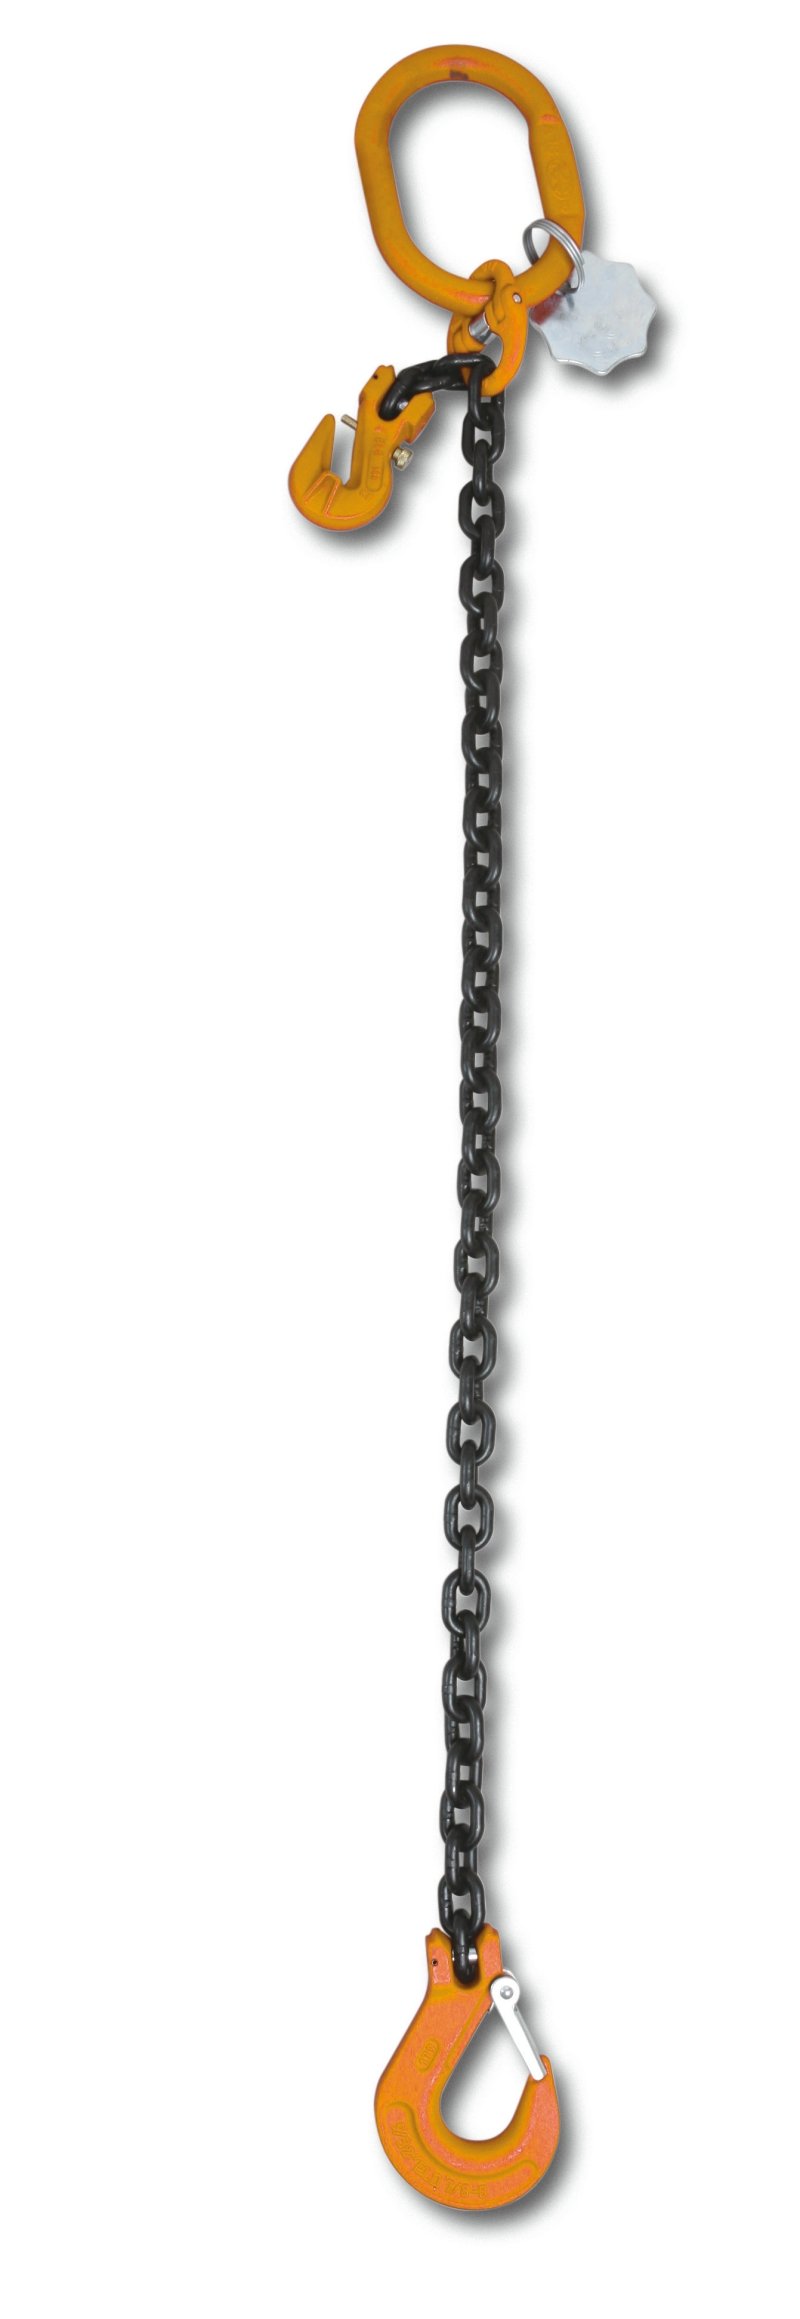 8096 - Lifting chain sling, 1 leg with clevis grab hook, grade 8